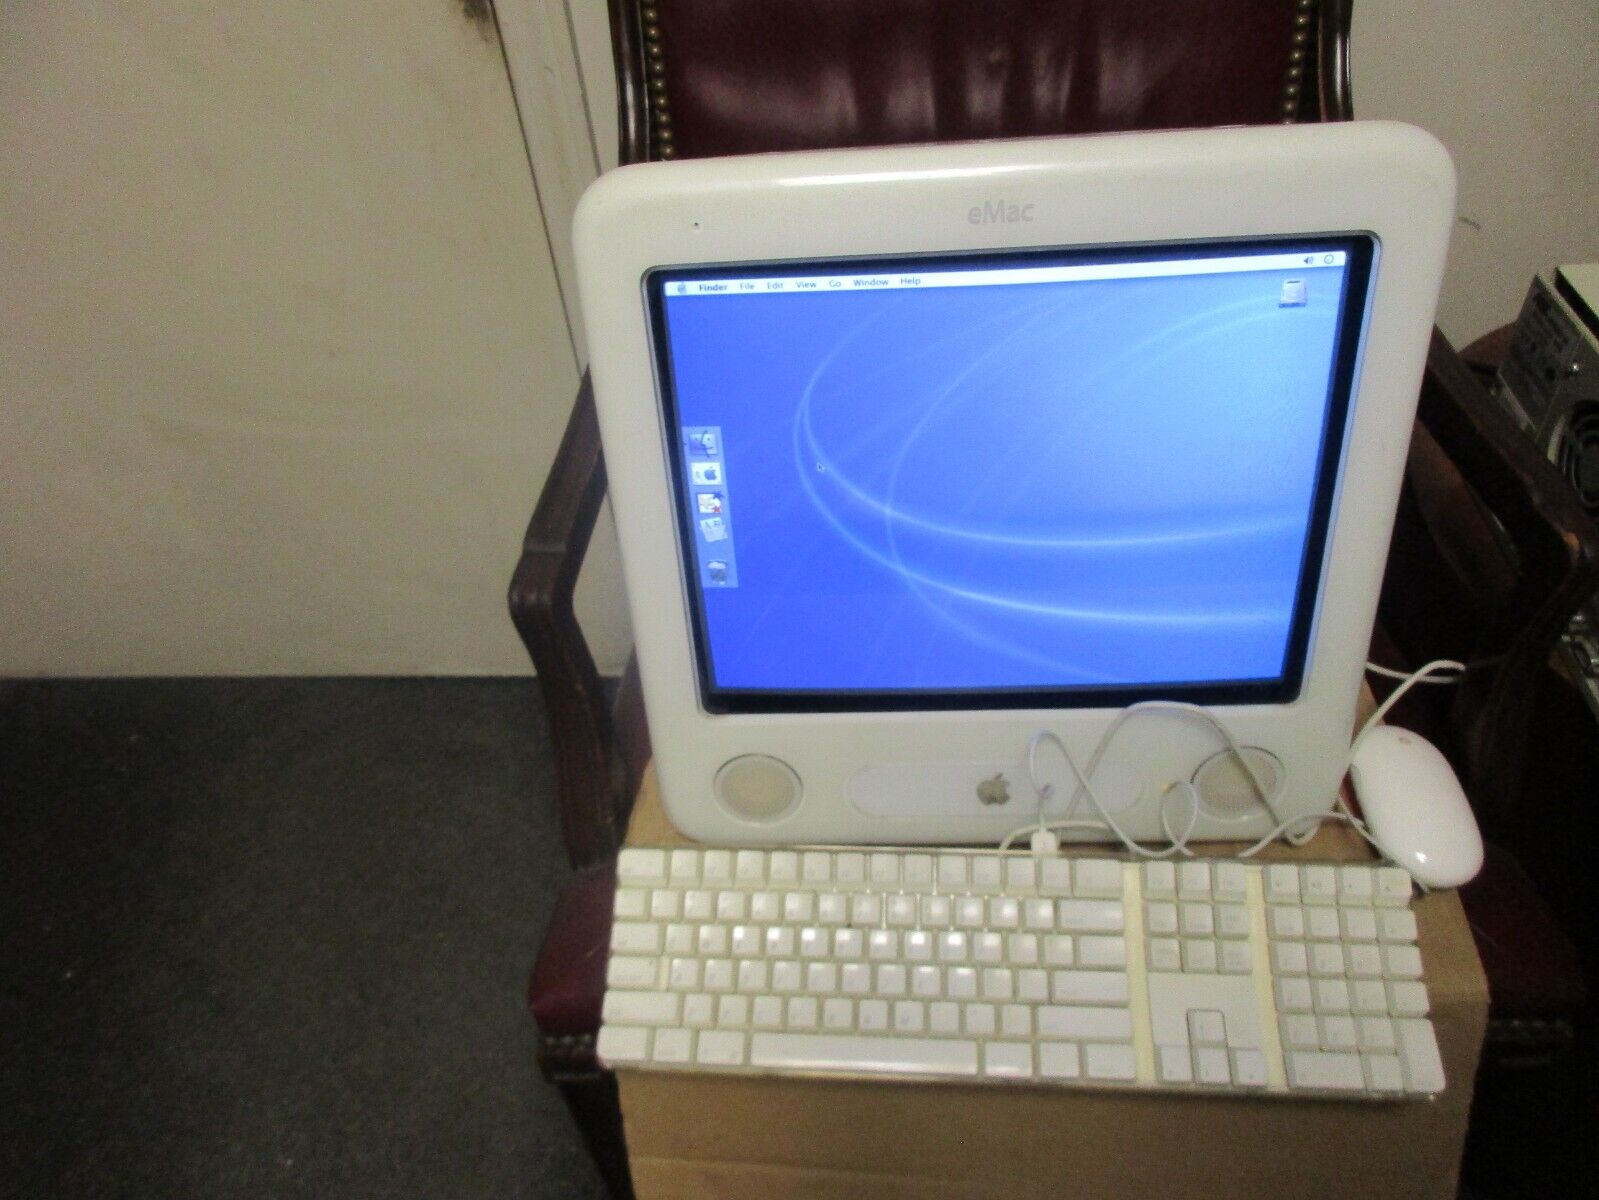 Apple eMac A1002 All in One vintage computer power PC G4 with Keyboard and Mouse